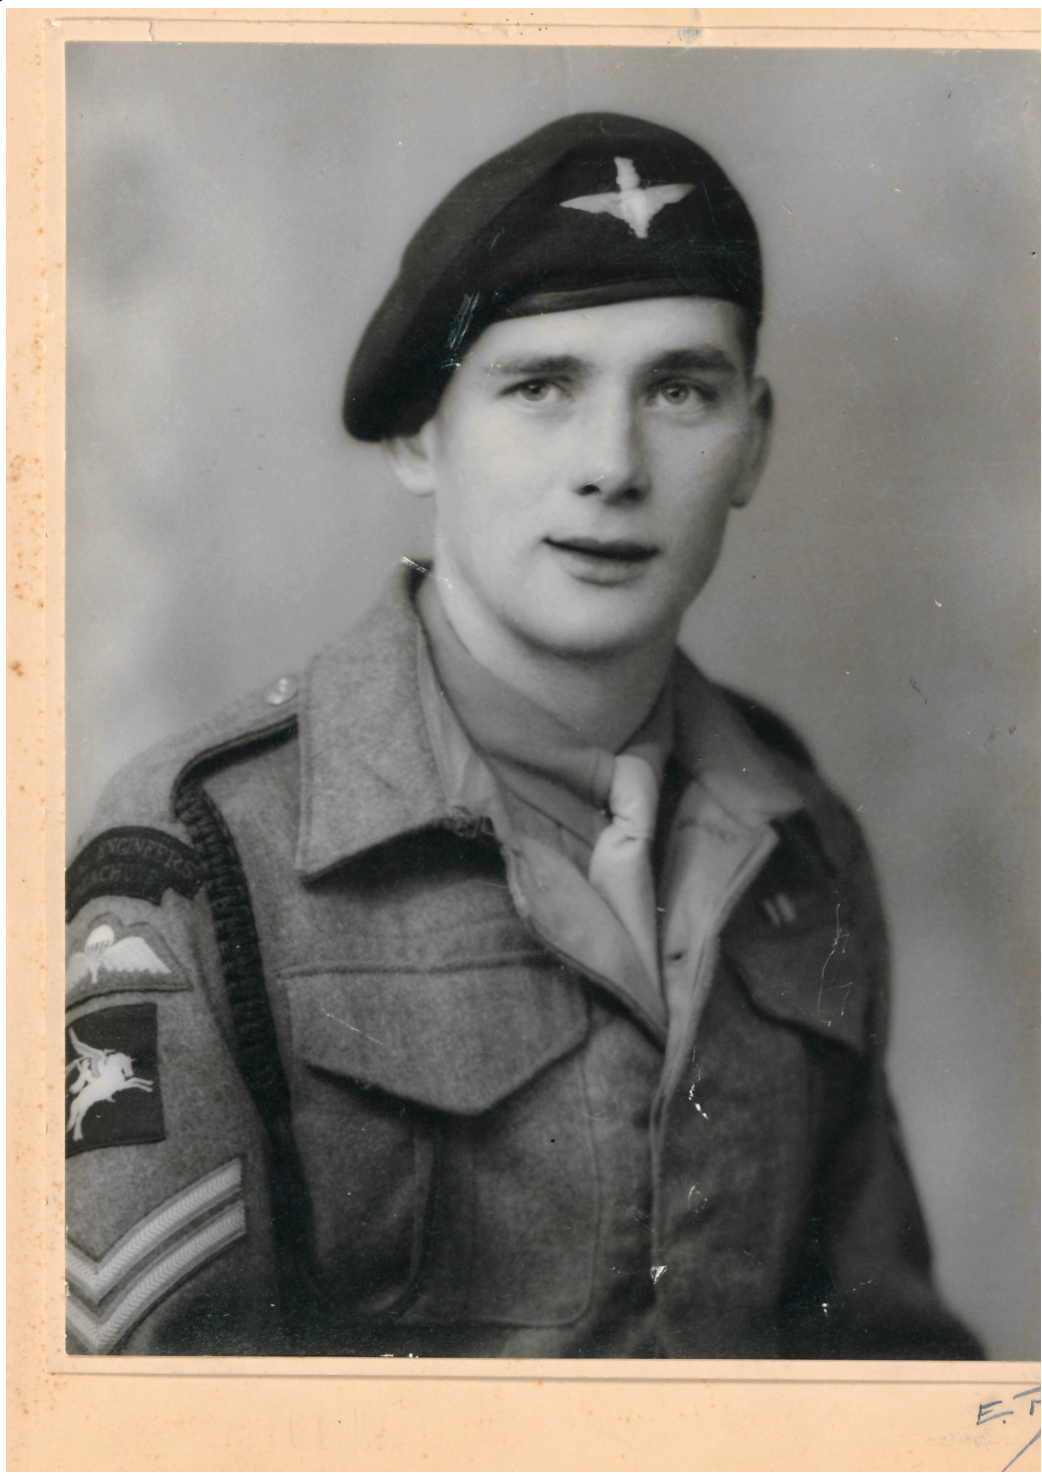 John Humphrey's as a young soldier